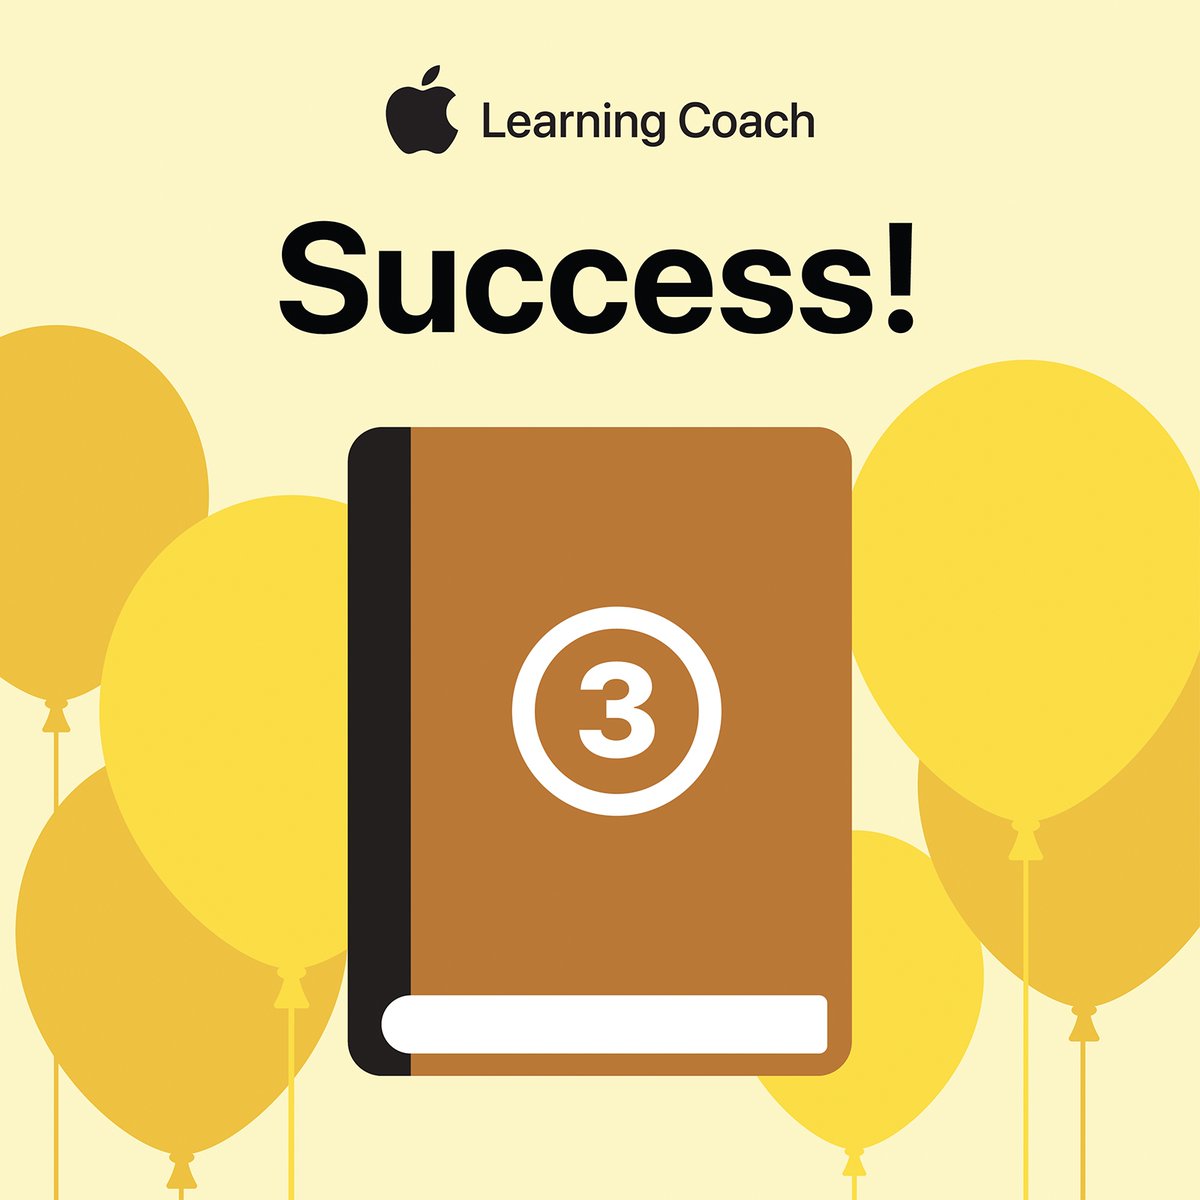 Unit 3 of 6 for Apple Learning Coach certification done! Great six hour live online webinar today. Collaborated with A LOT of really great educators. Halfway there! #AppleLearningCoach #Apple #BPSD #BPSDInnovators #InnovationVanguard #OCCUE